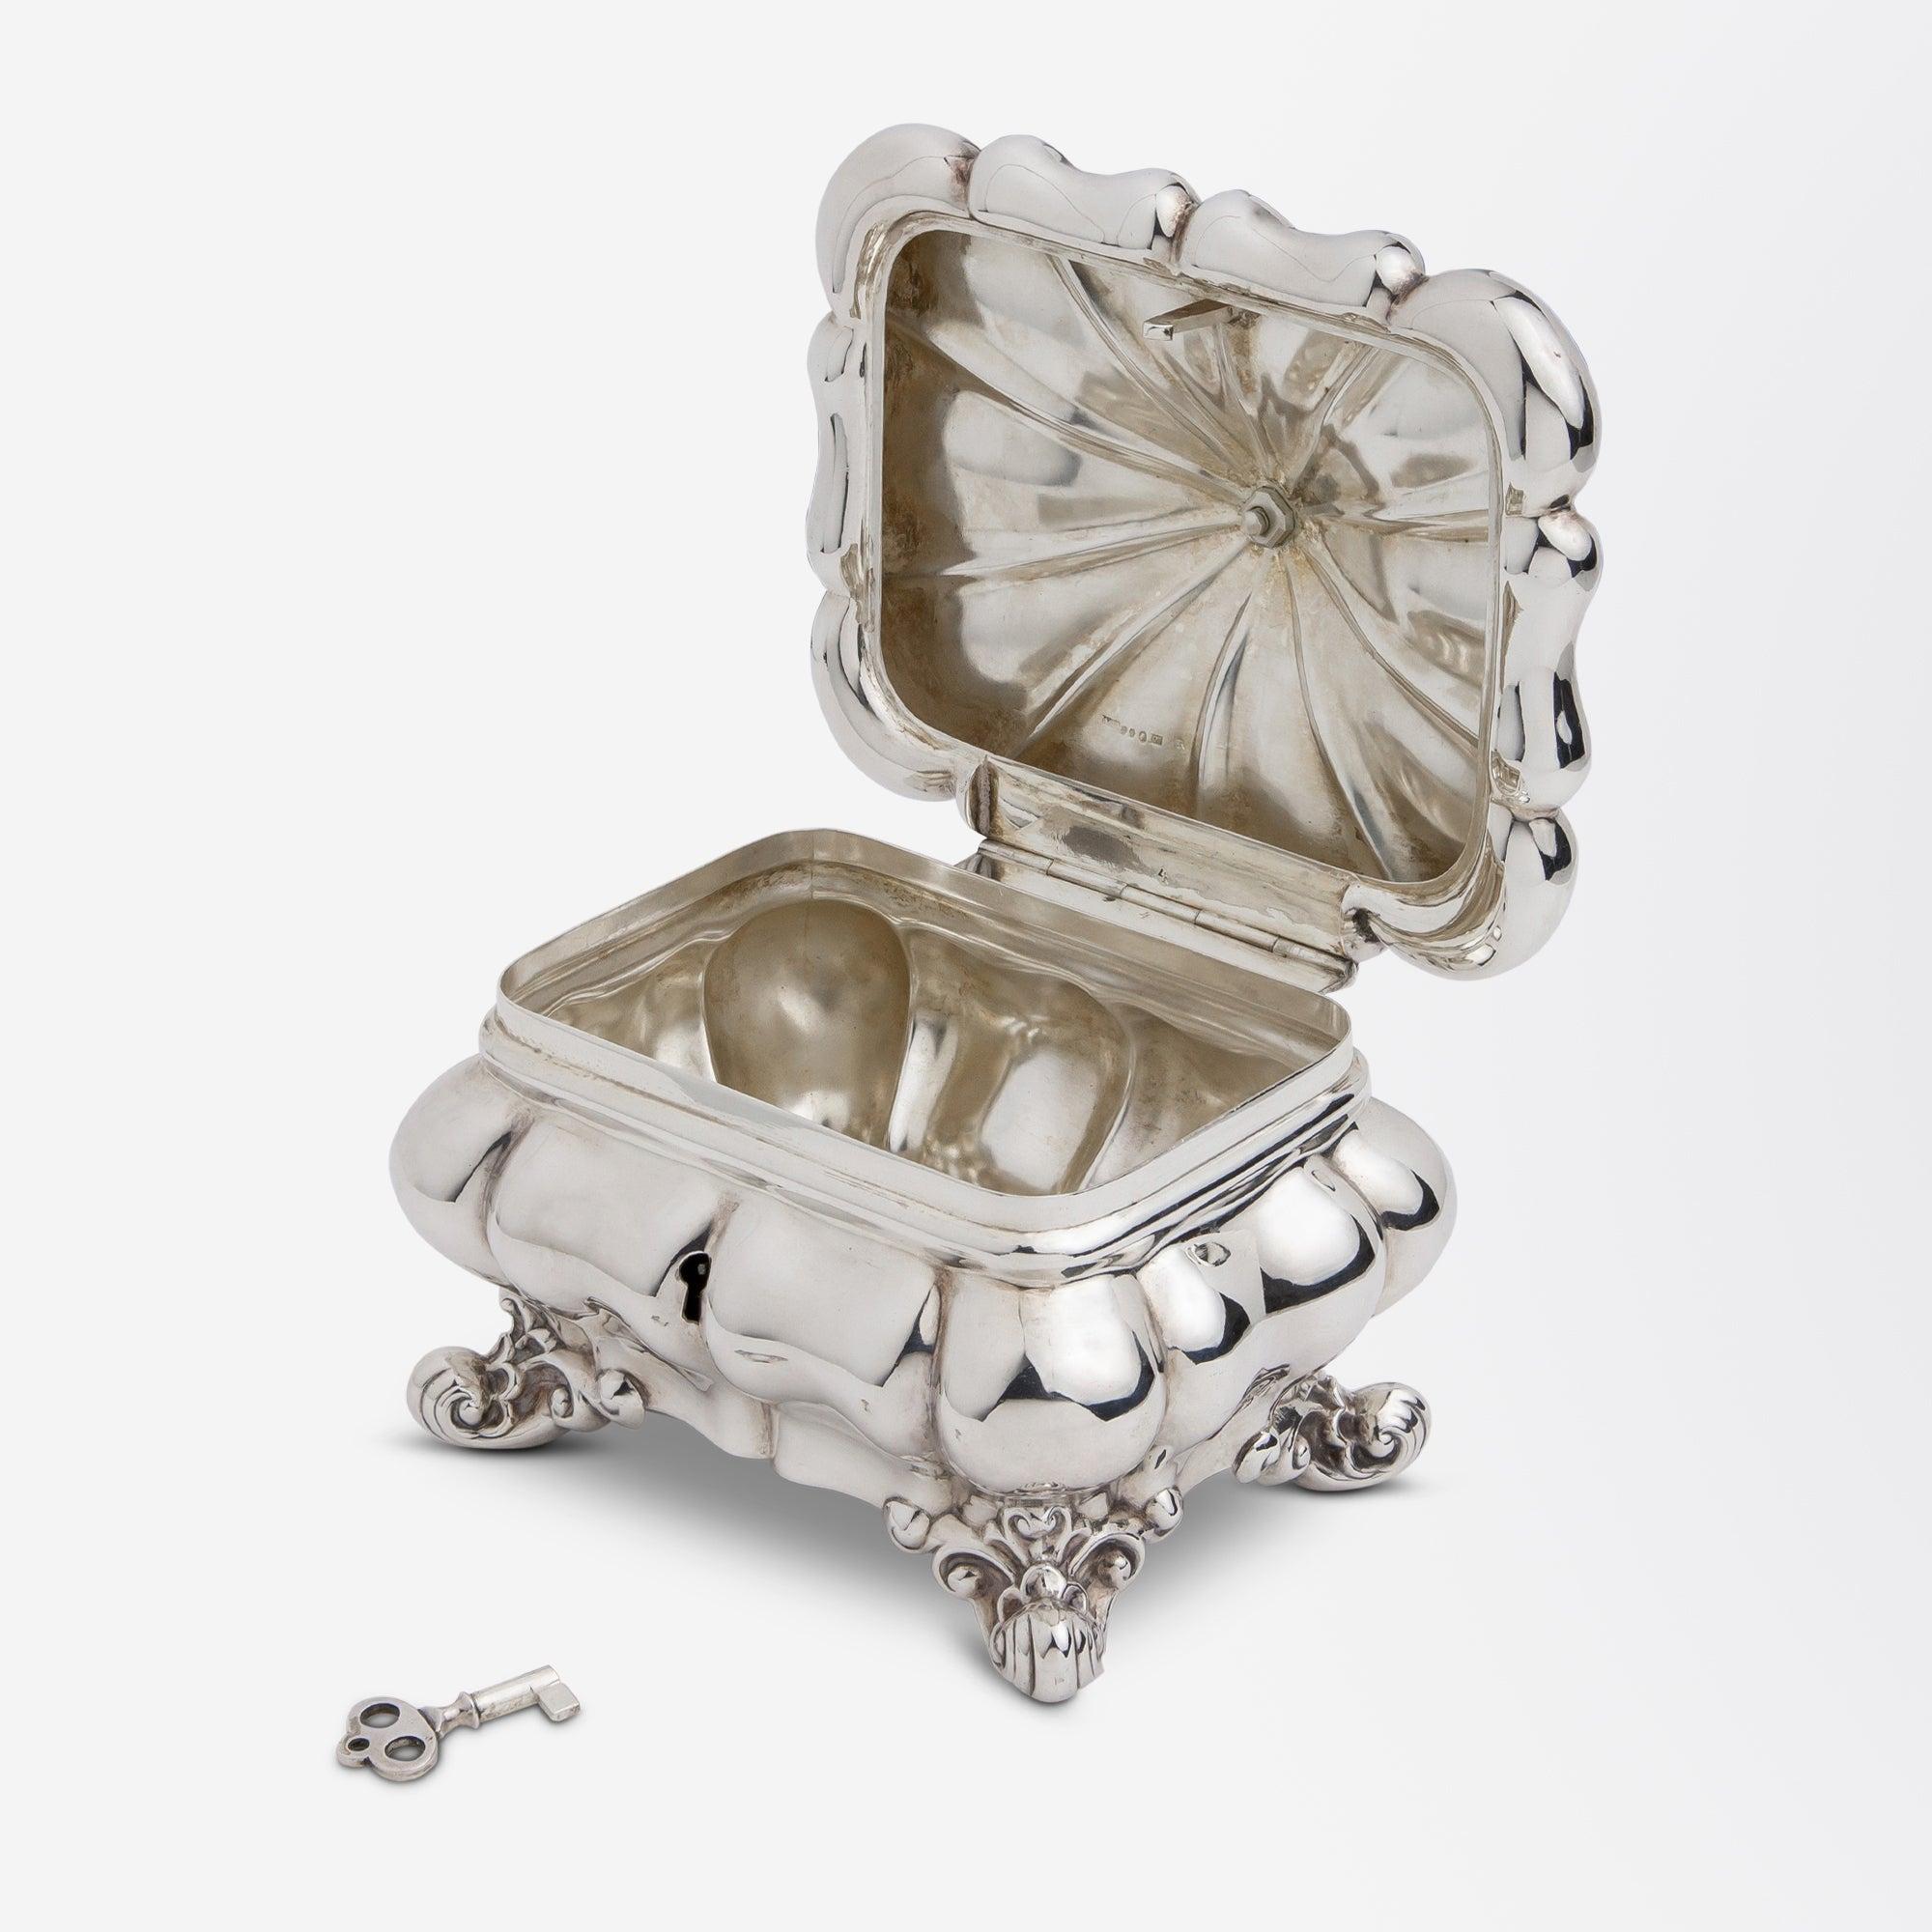 A really beautiful Swedish sterling silver lockable box or sugar chest from the early 20th Century. The handcrafted box was made in Stockholm in 1916 by 'Axel Gabriel Dufva' (1822-1897) who by this stage had passed away and his company was being run